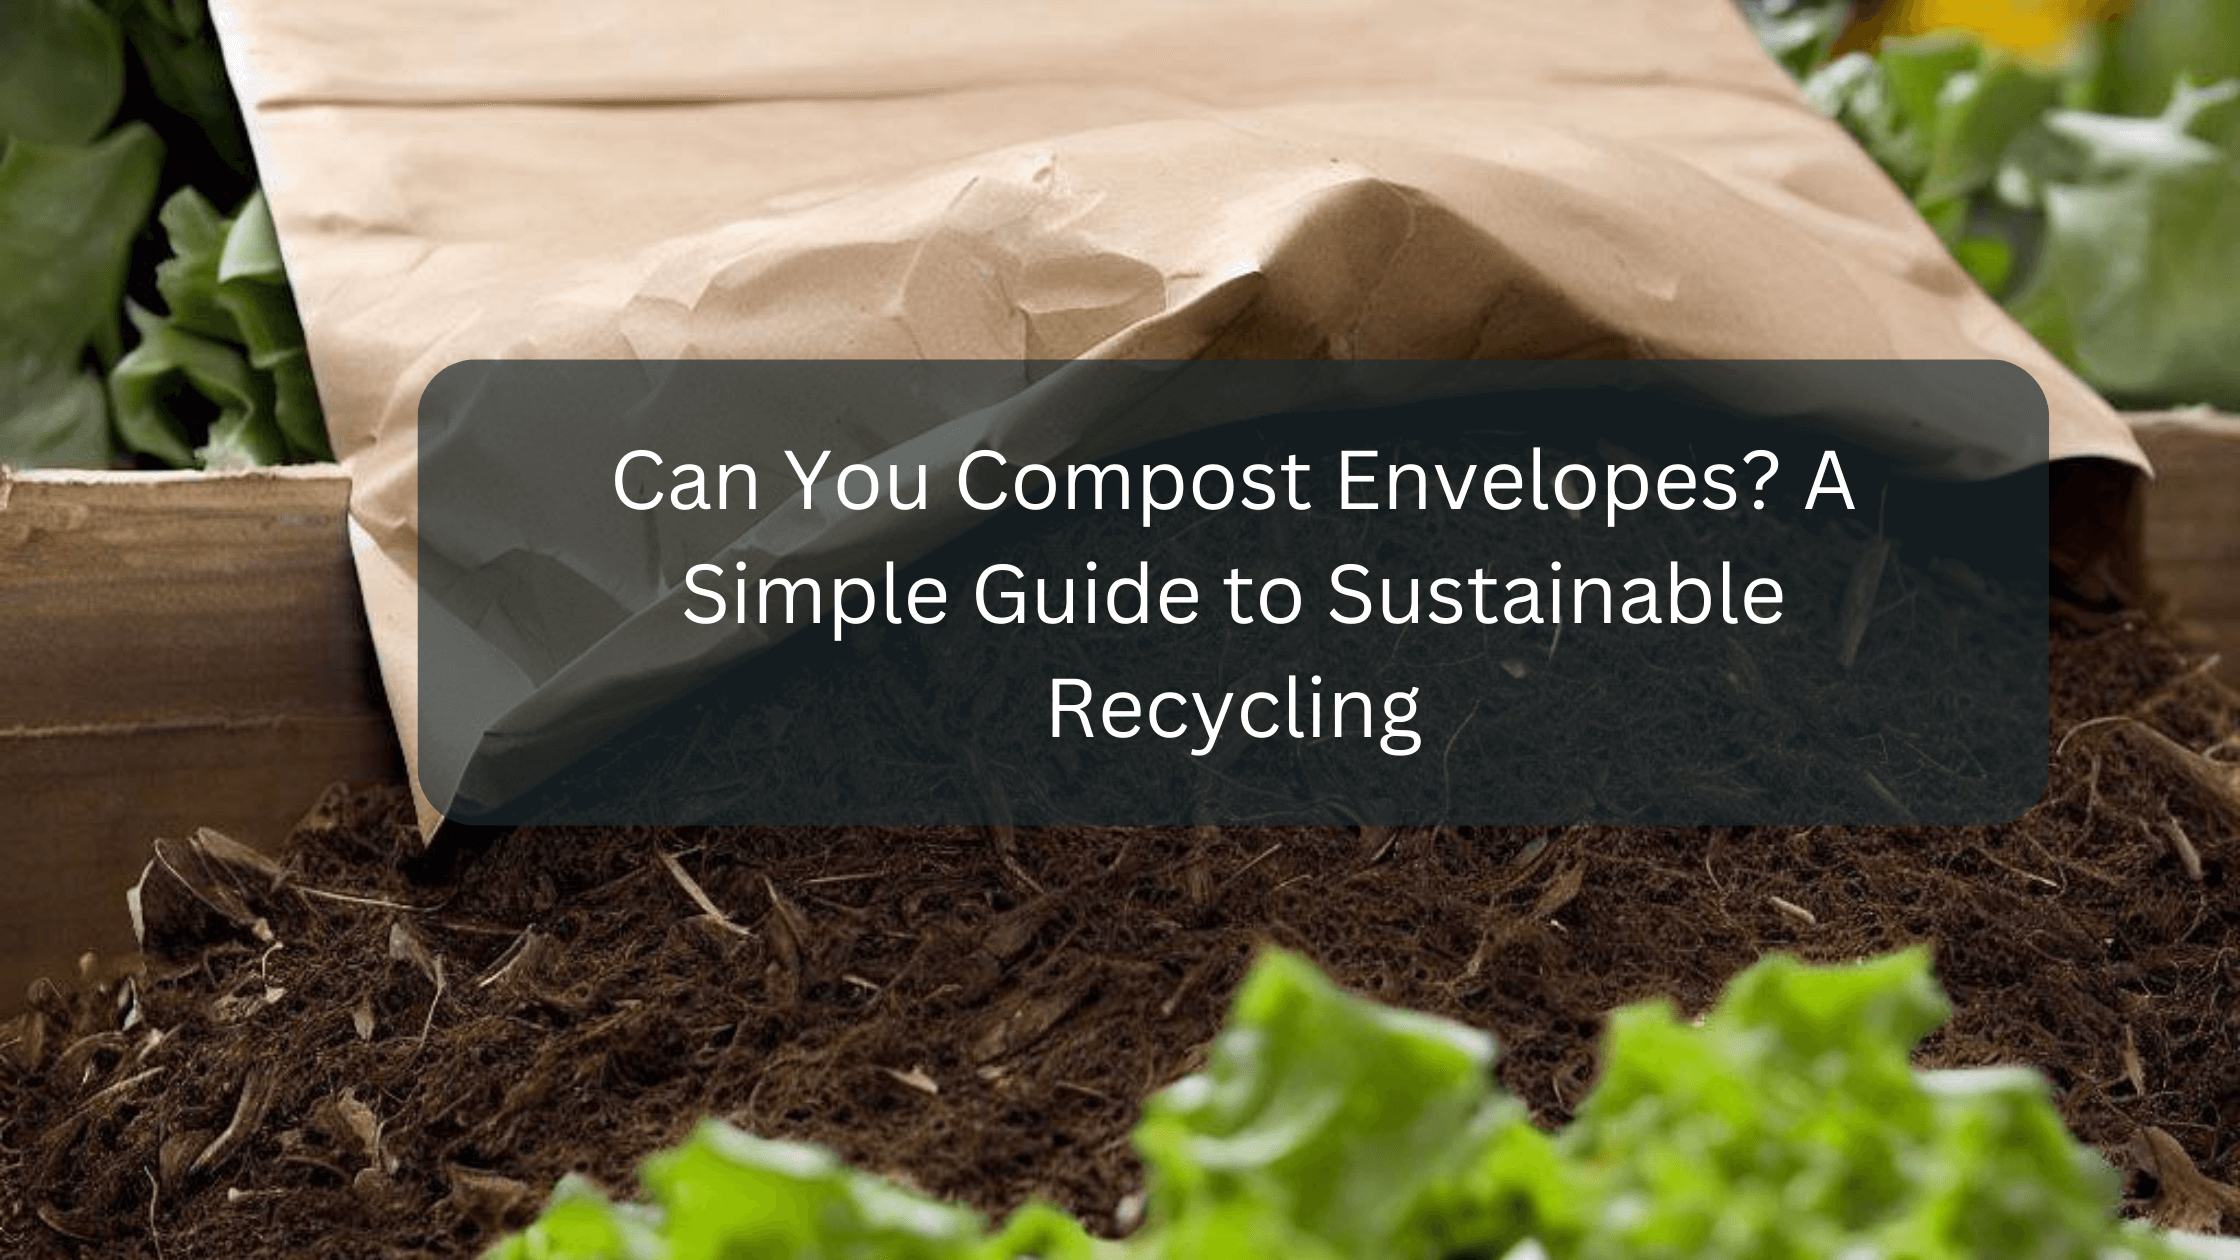 Can You Compost Envelopes? A Simple Guide to Sustainable Recycling